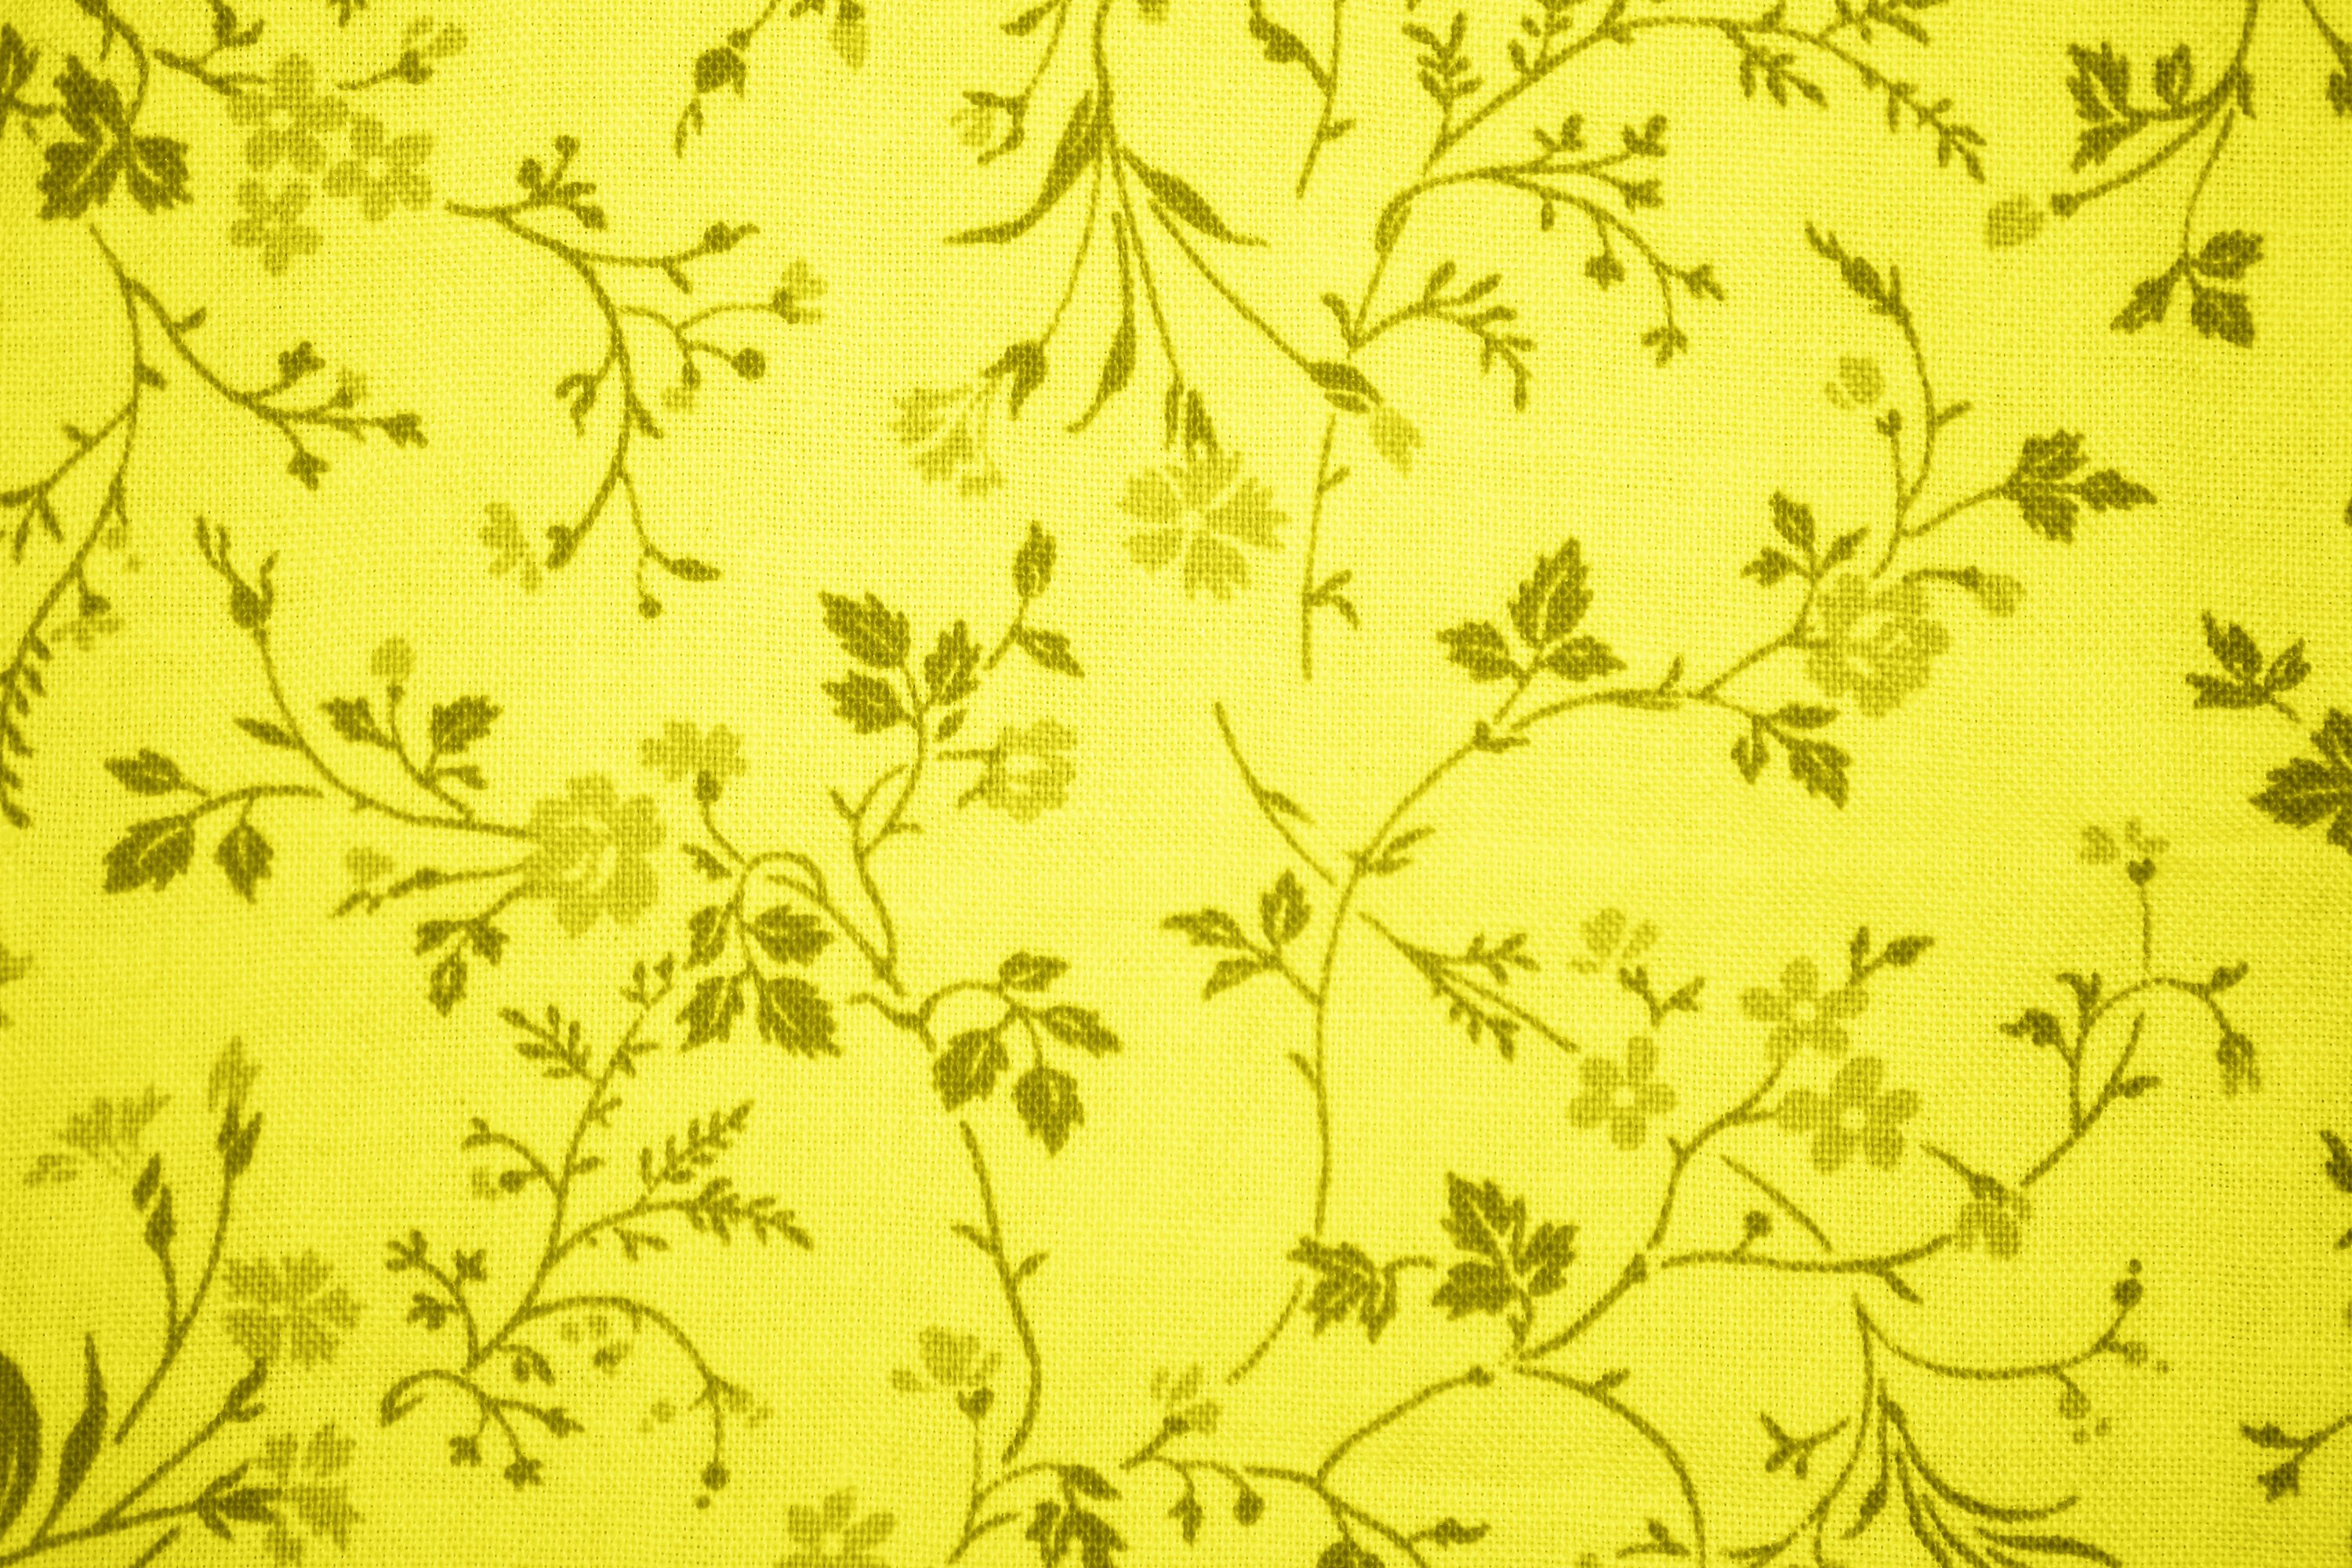 Yellow Floral Print Fabric Texture High Resolution Photo